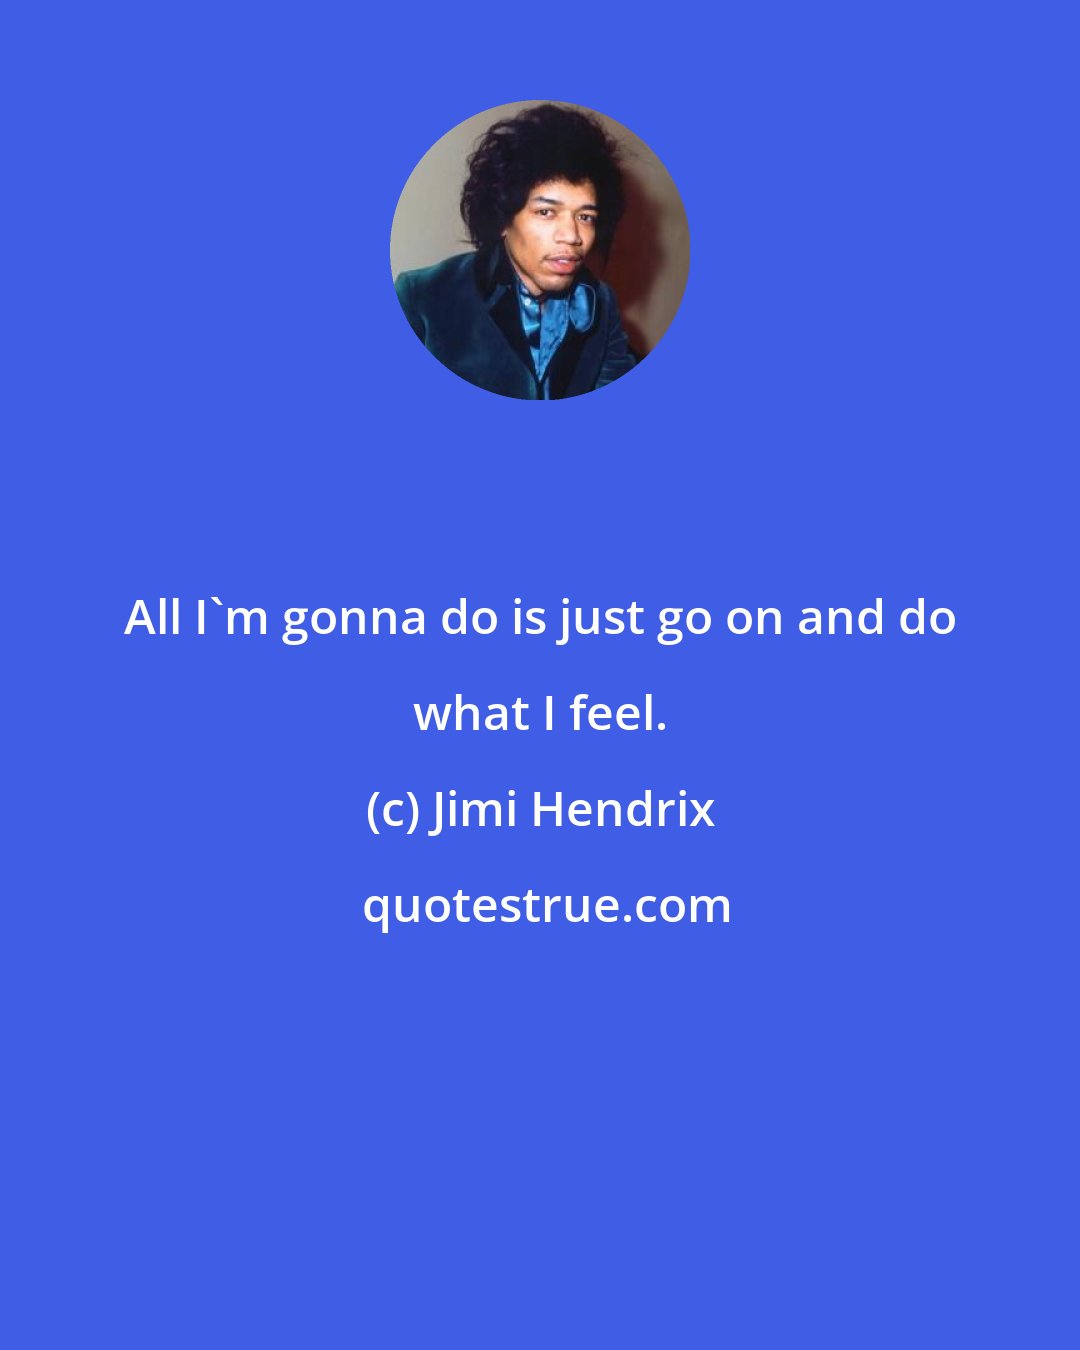 Jimi Hendrix: All I'm gonna do is just go on and do what I feel.